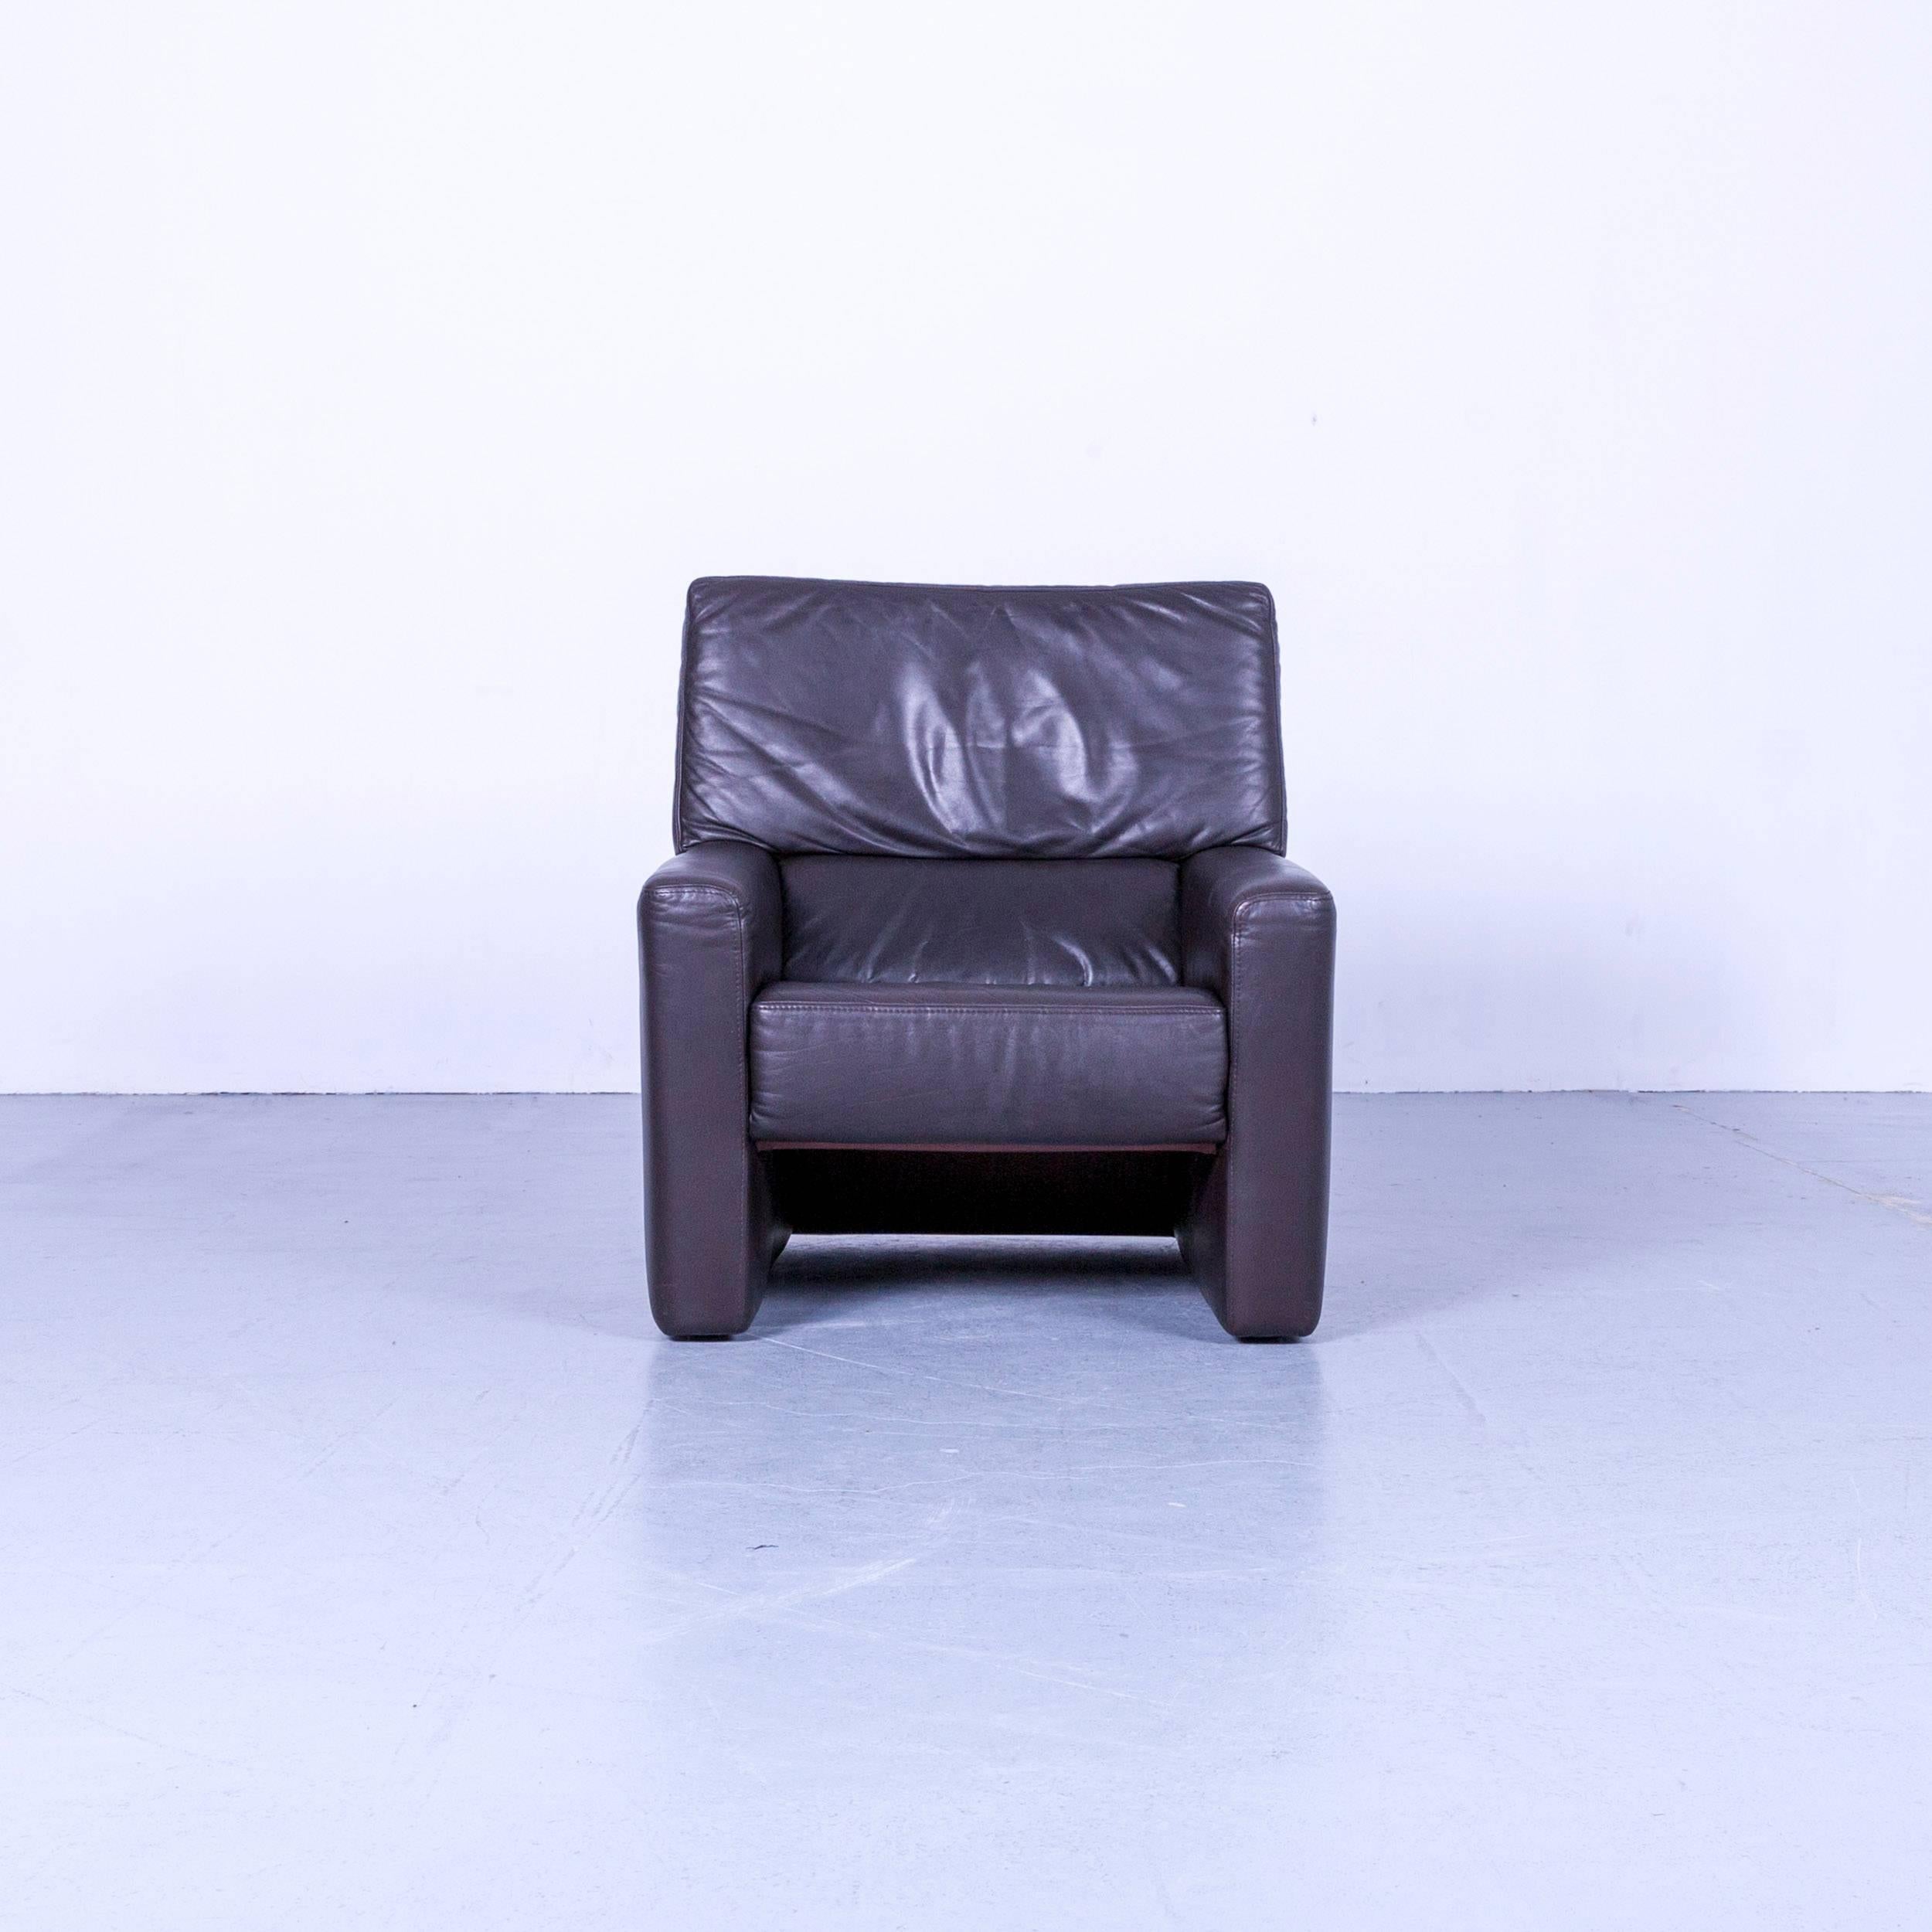 We offer delivery options to most destinations on earth. Find our shipping quotes at the bottom of this page in the shipping section.

An Brühl & Sippold Visavis Designer Armchair Black One-Seater

Shipping:

An on point shipping process is our